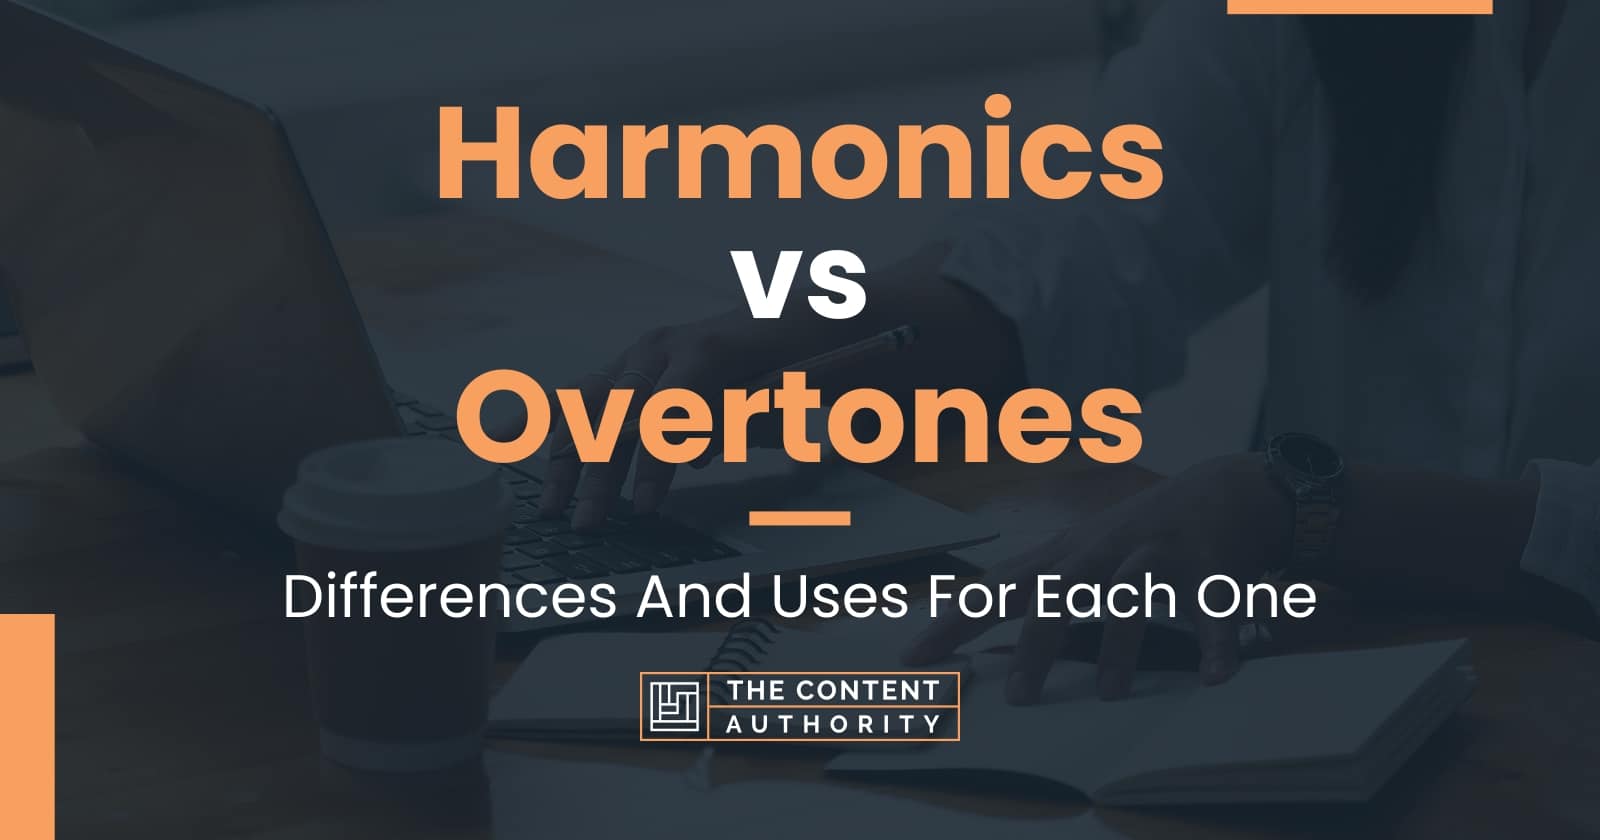 Harmonics vs Overtones: Differences And Uses For Each One